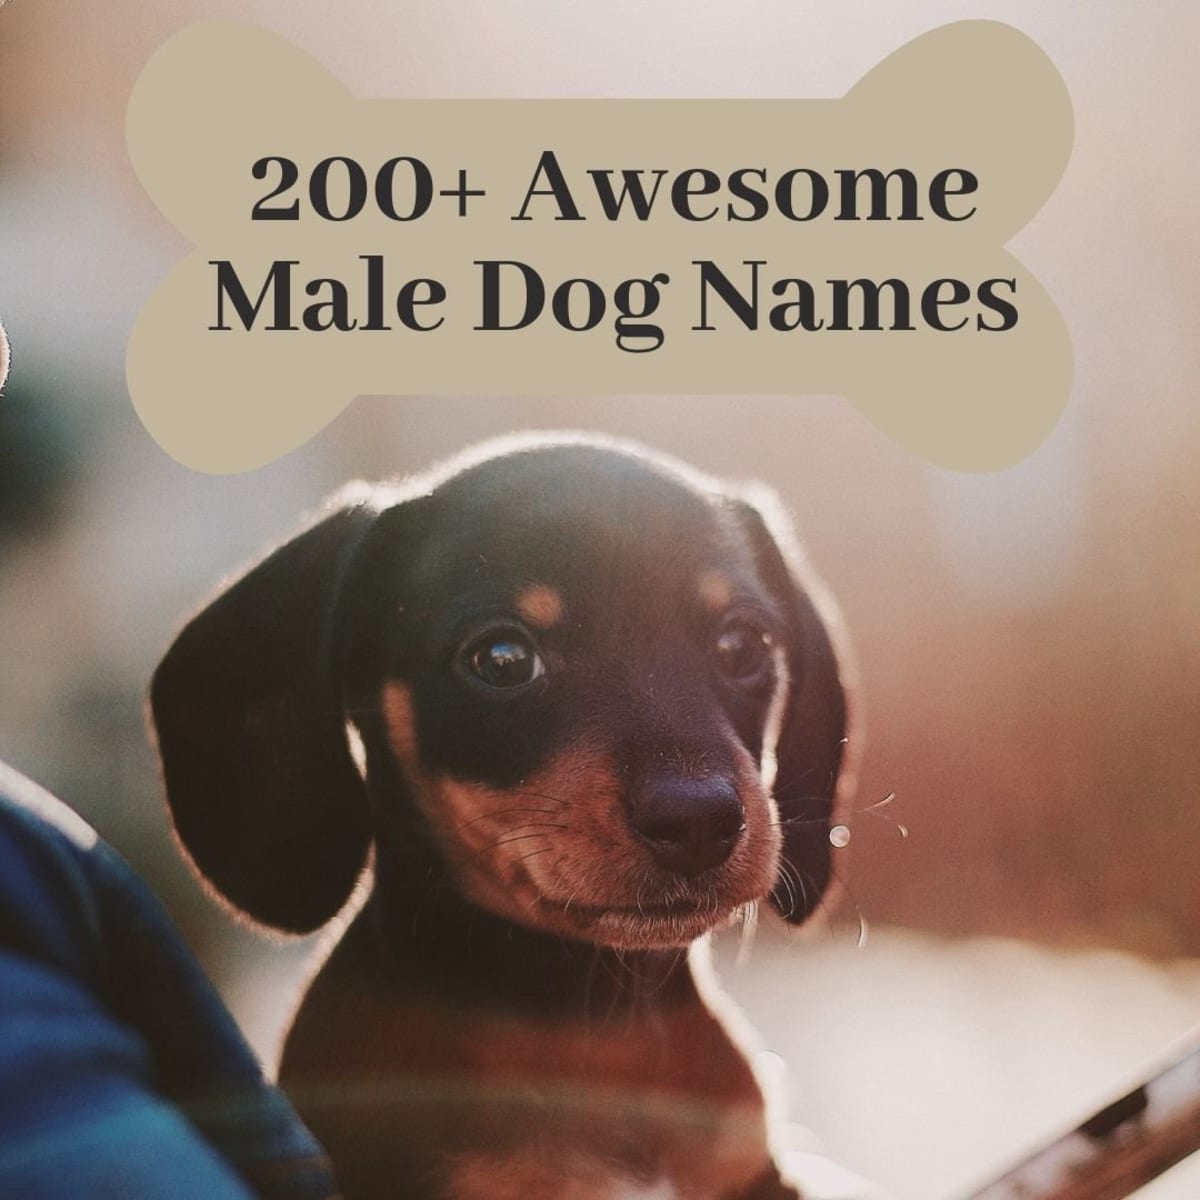 25+ Cool Male Dog Names and Meanings   PetHelpful